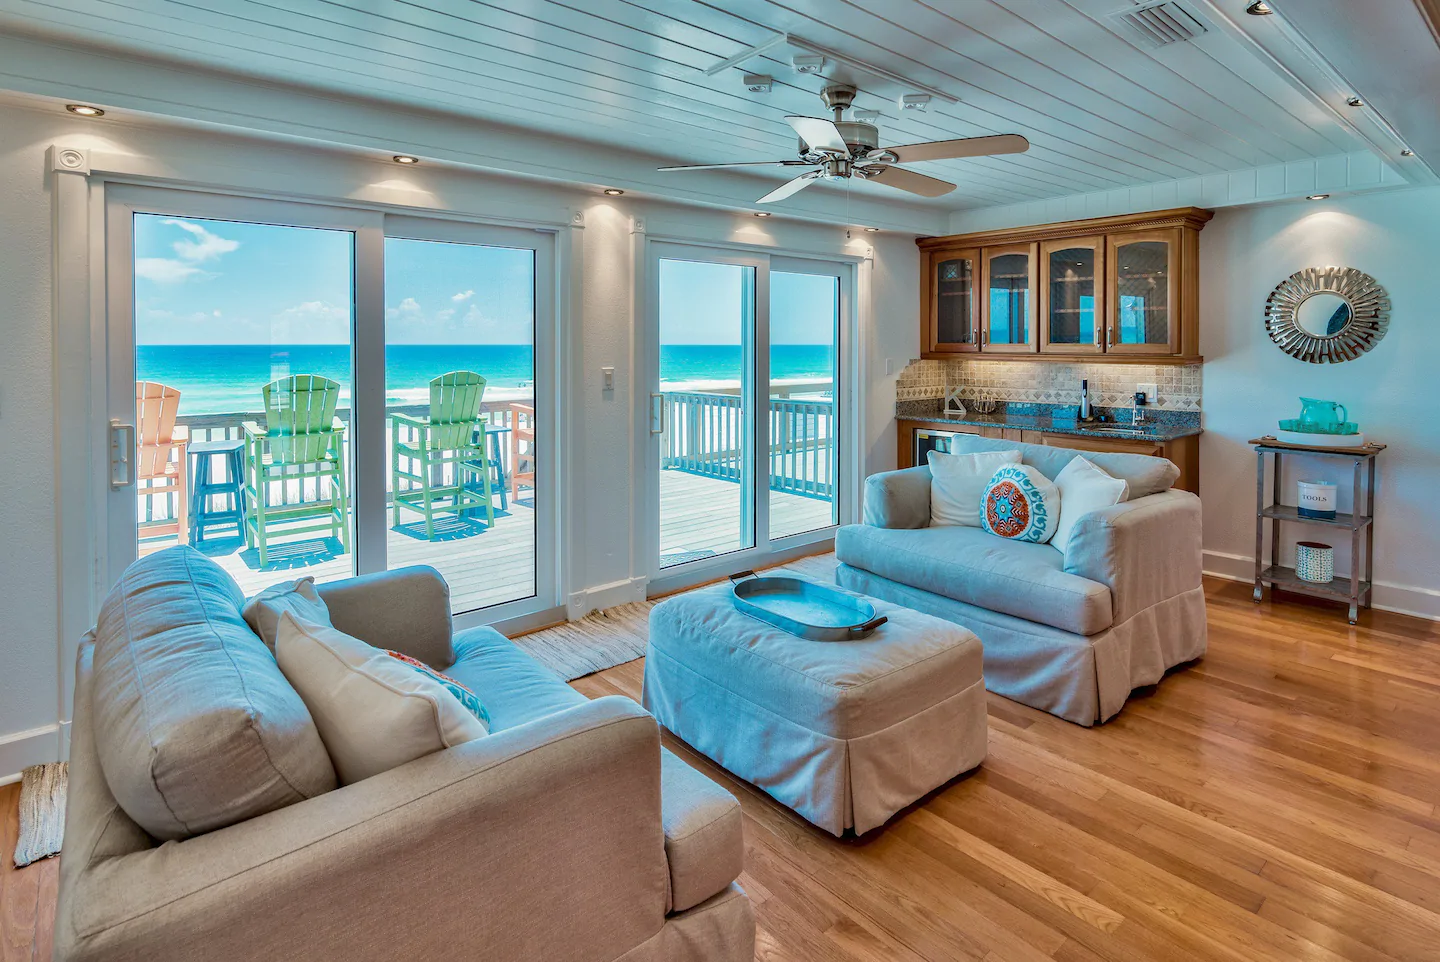 Photo of the living room and balcony in a beachfront Airbnb in Destin.